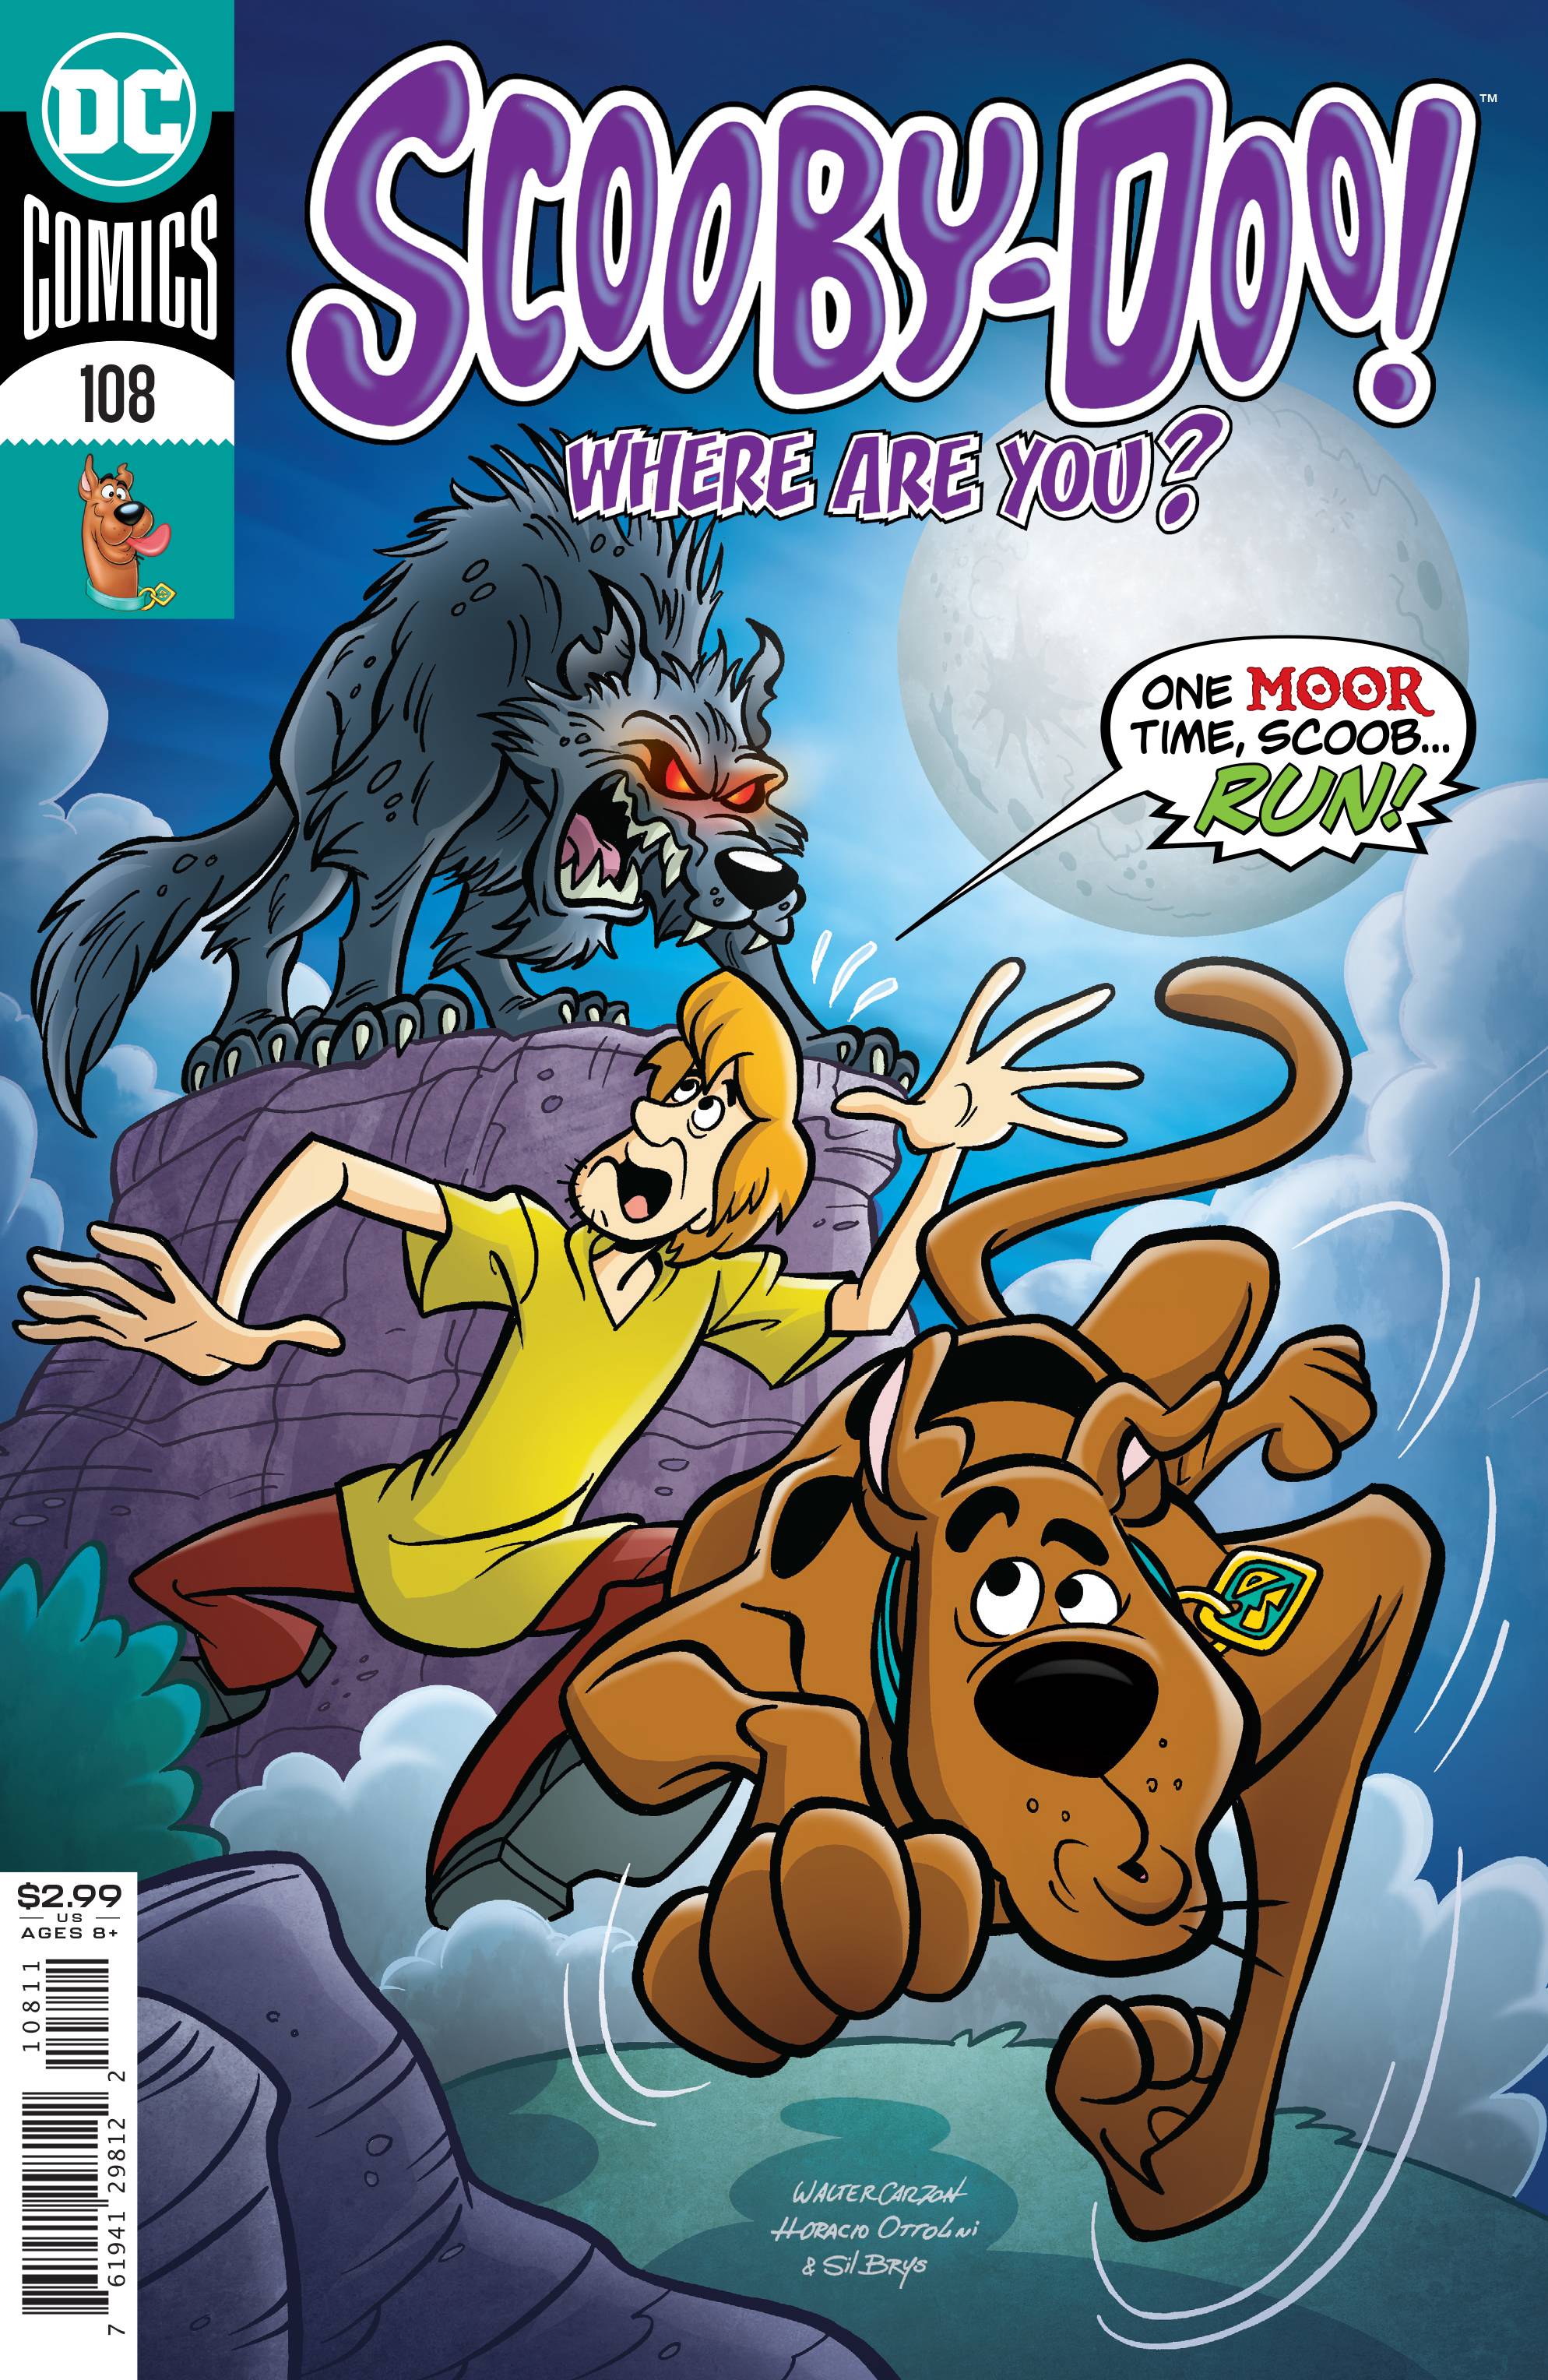 SCOOBY DOO WHERE ARE YOU #108 | Game Master's Emporium (The New GME)